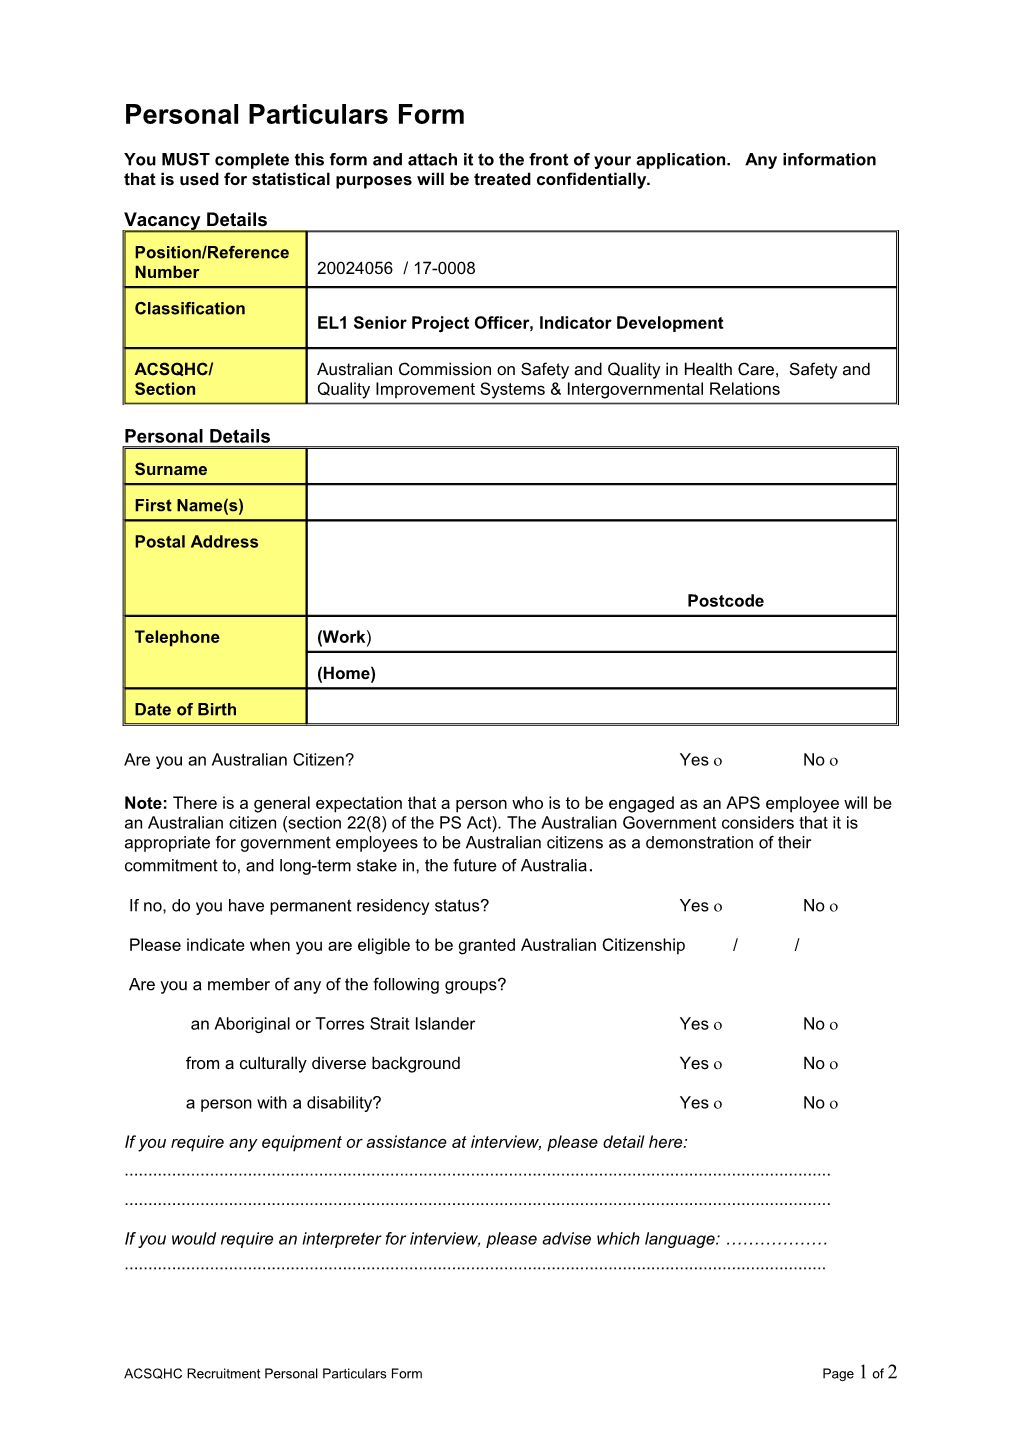 Personal Particulars Form